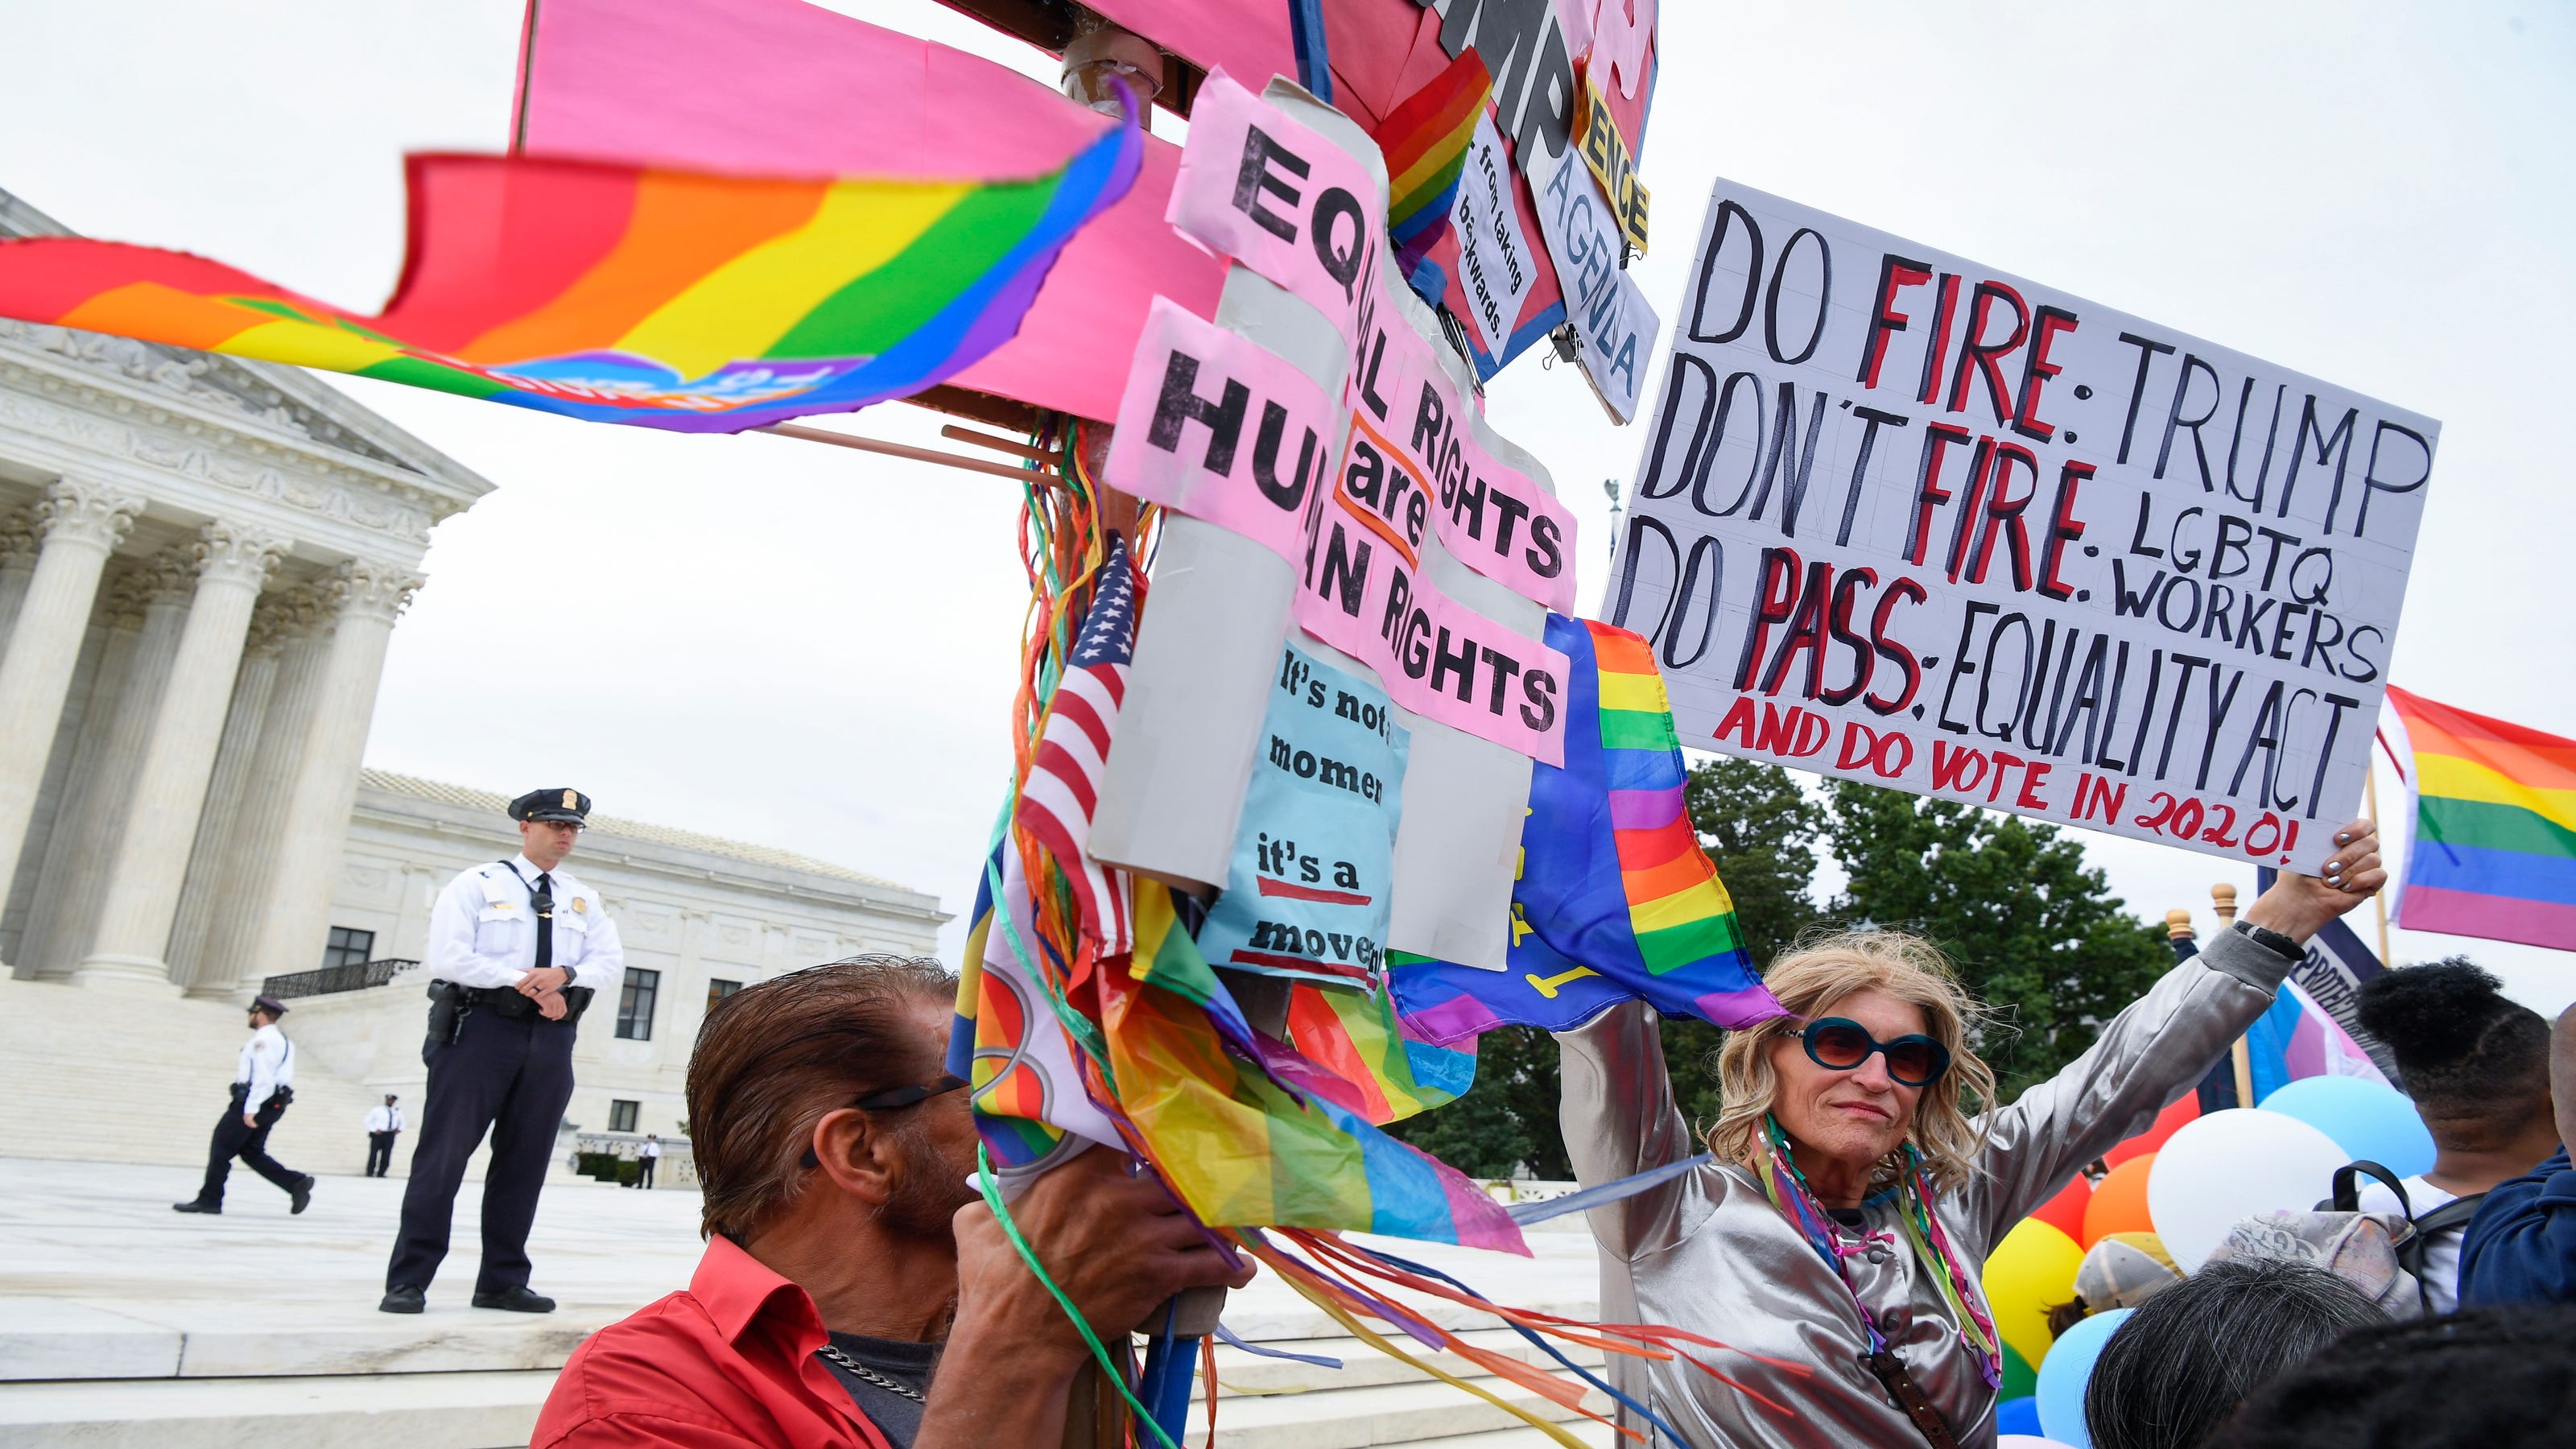 Protesters At Supreme Court As It Weighs Lgbt Rights